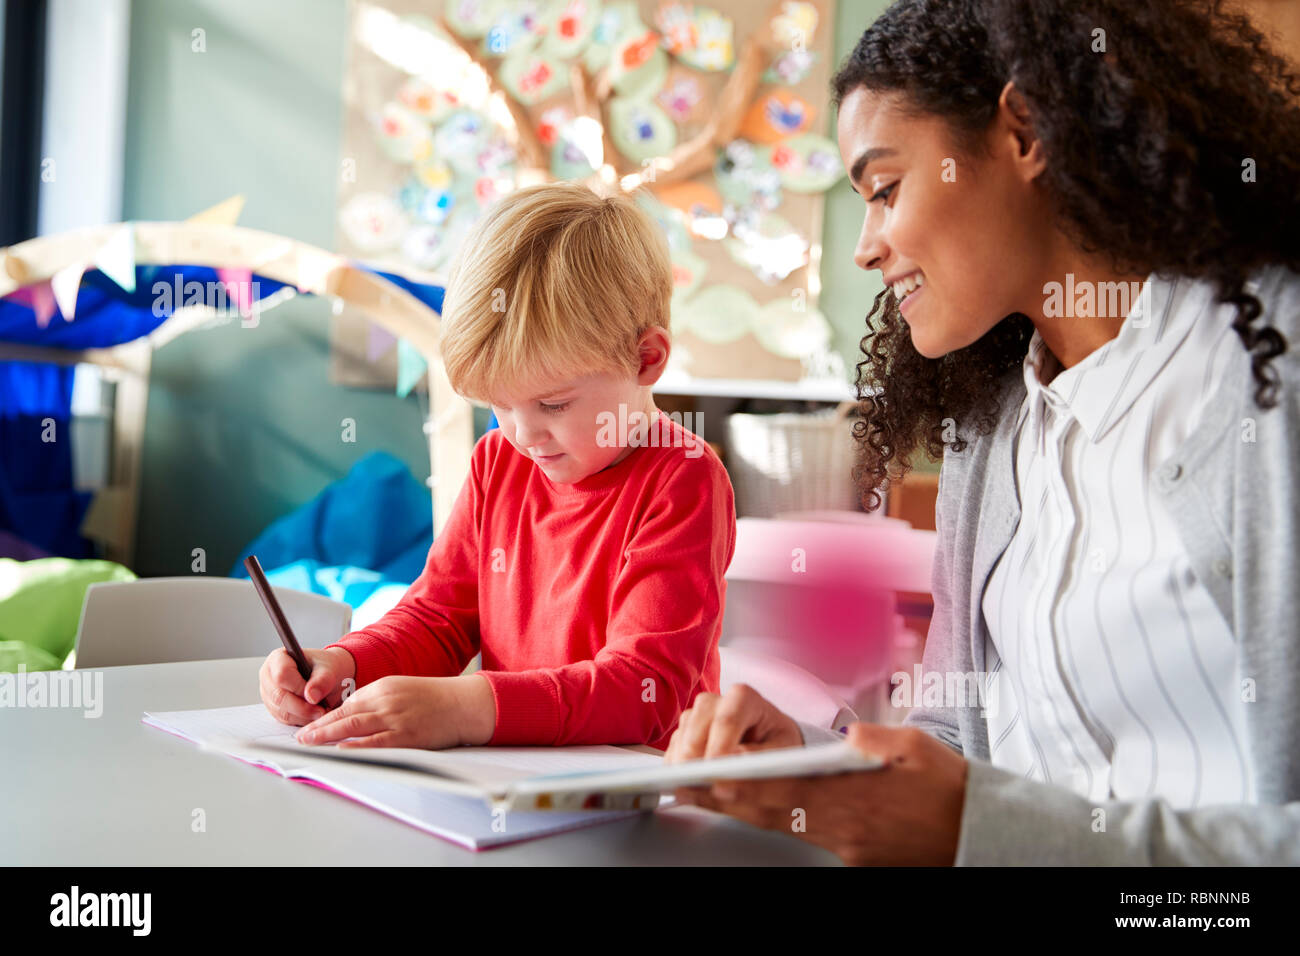 Female infant school teacher working one on one with a young white schoolboy, sitting at a table in a classroom writing, close up Stock Photo